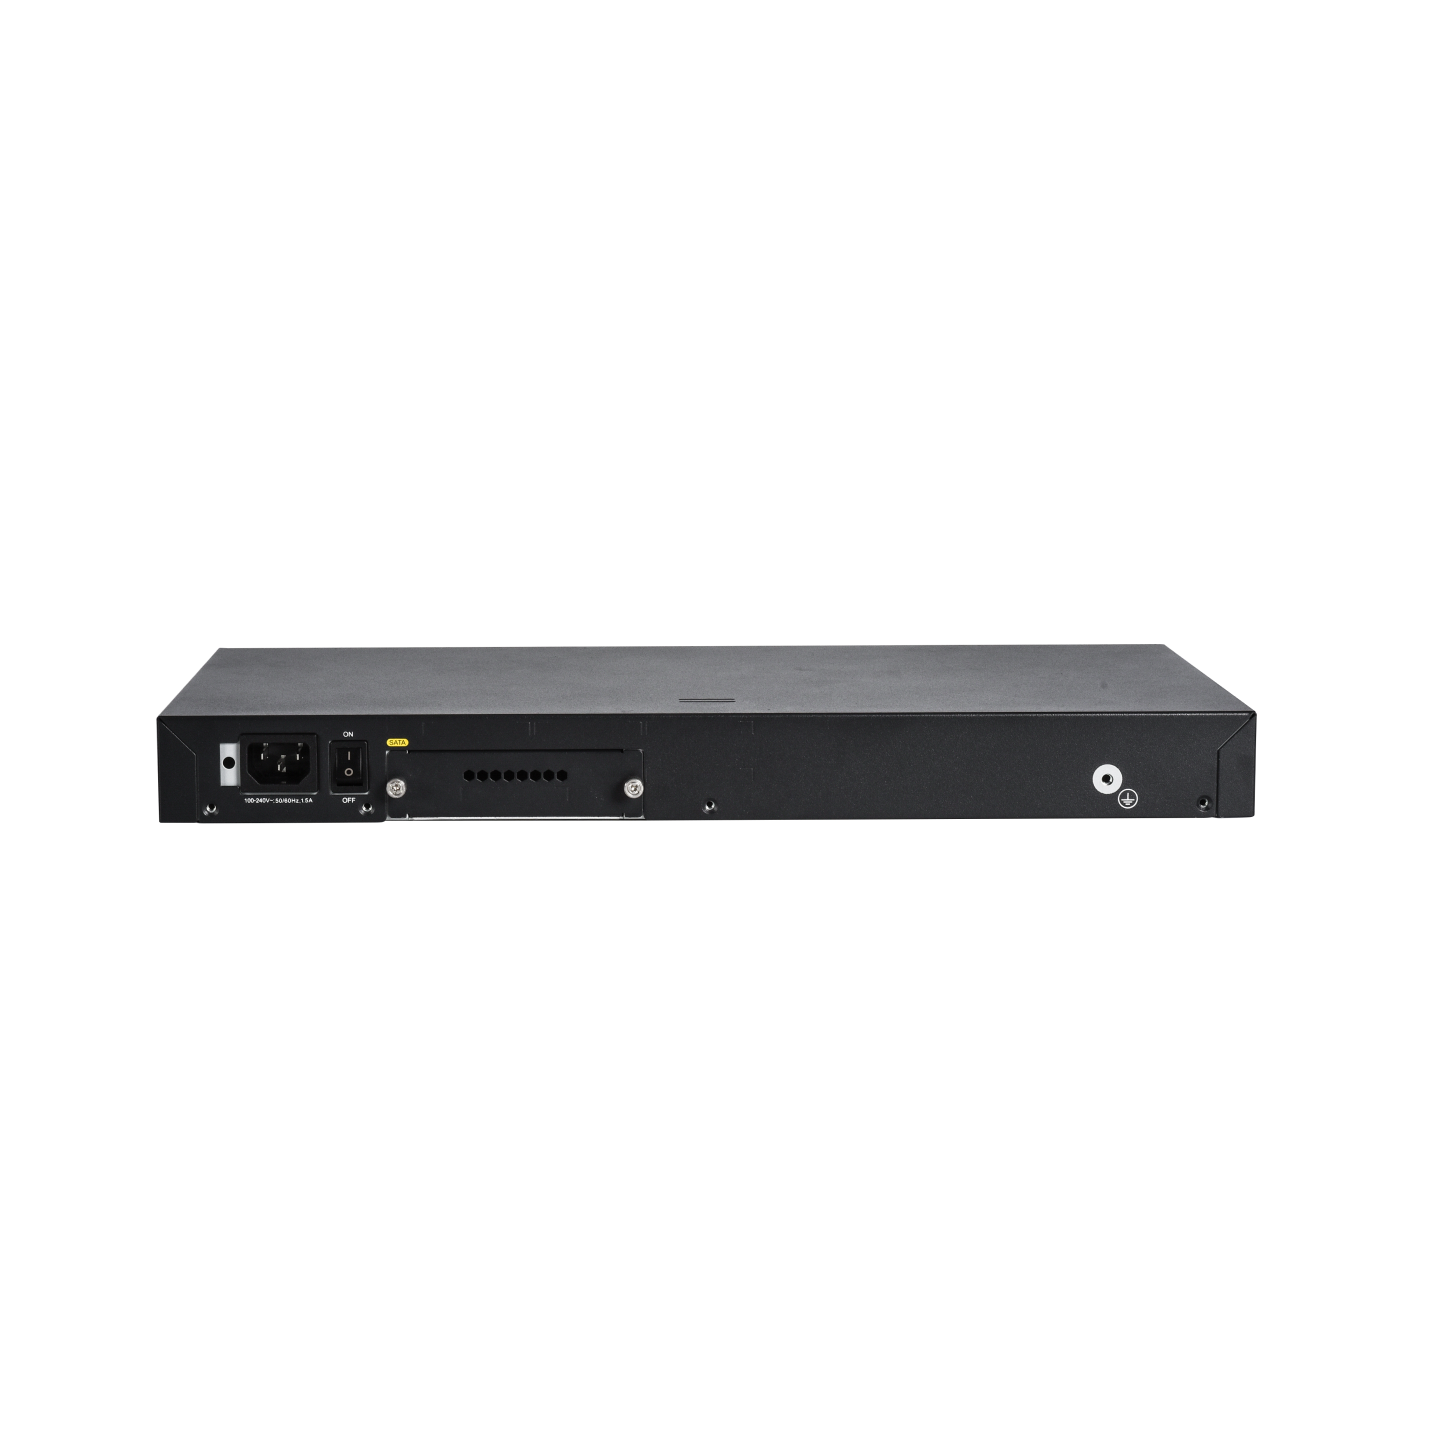 Ruijie RG-NBR6205-E Reyee High-performance Cloud Managed Security Router